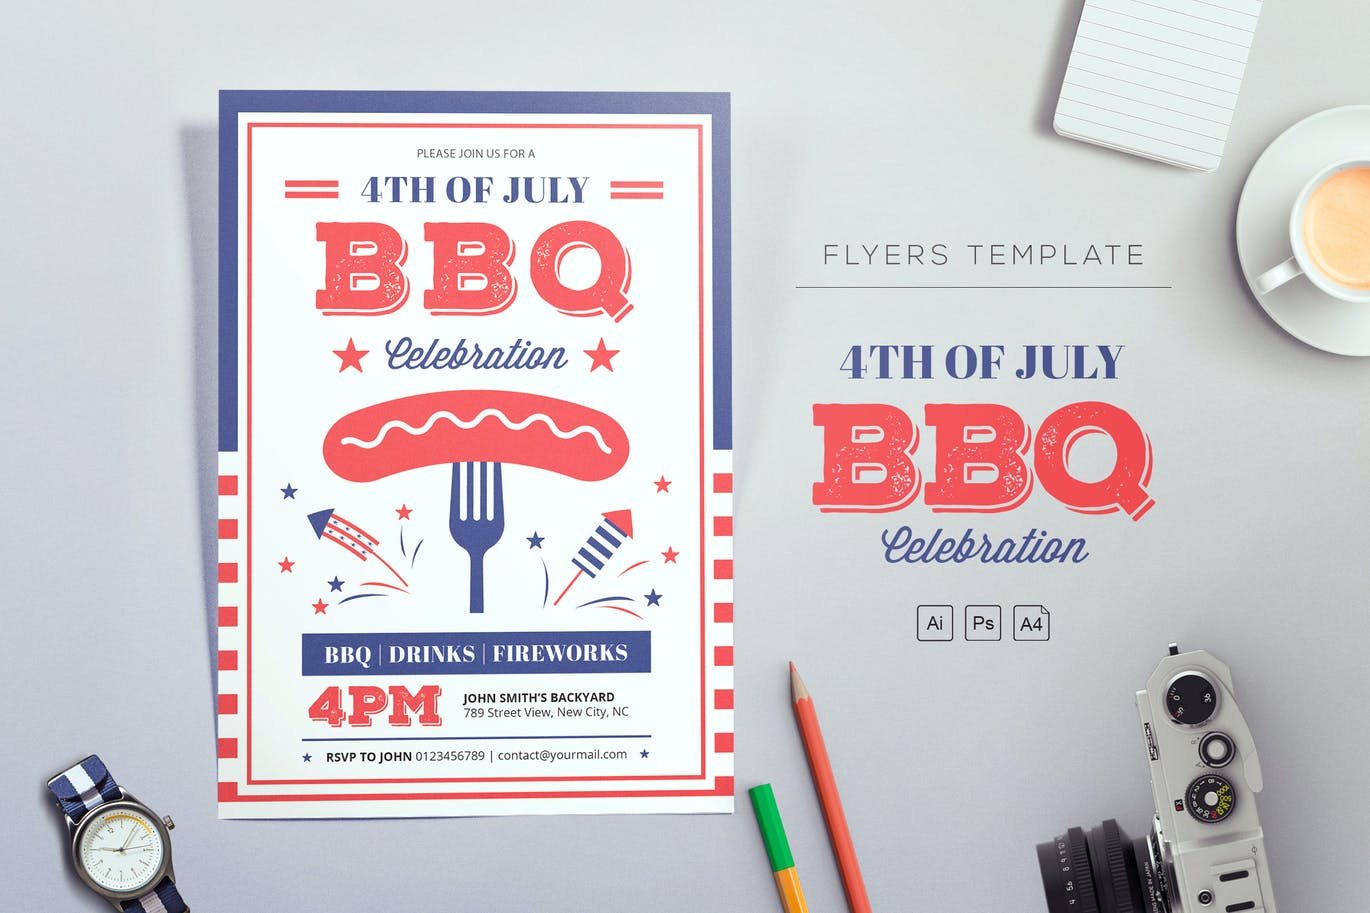 The 4th of july bbq flyer templates